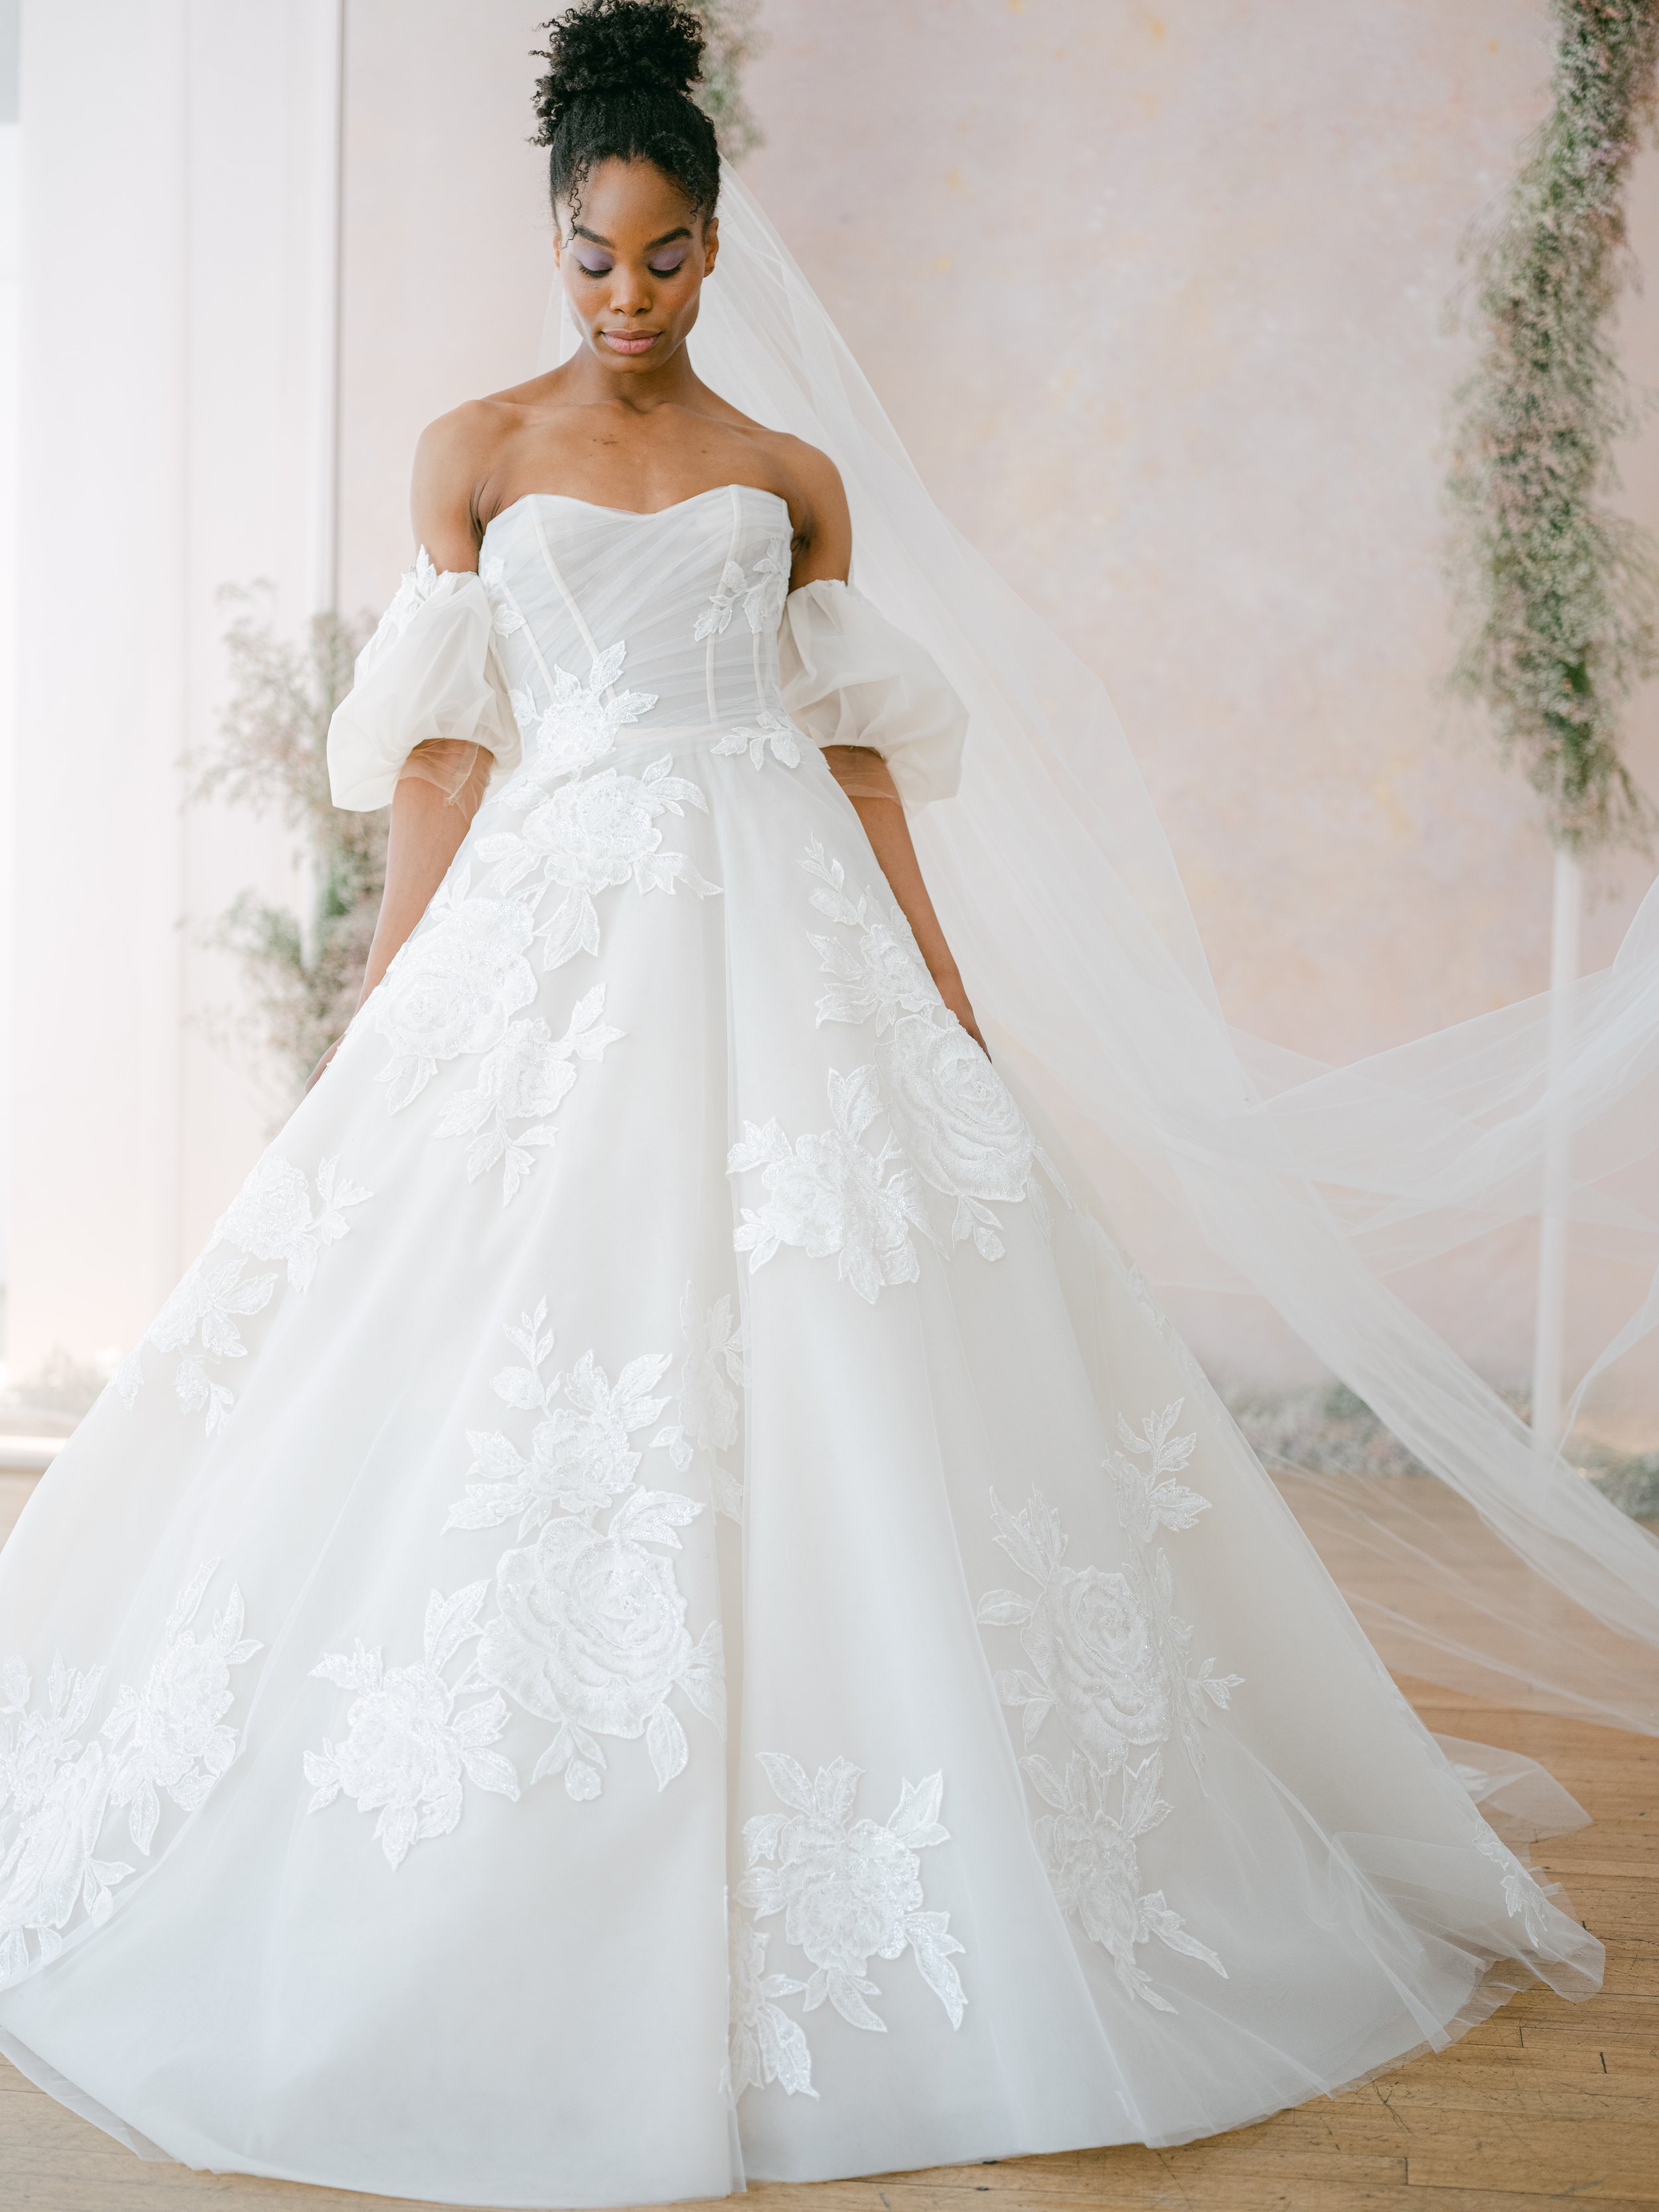 Glitter Cape Wedding Ball Gown by Mary's Bridal MB6090 – ABC Fashion